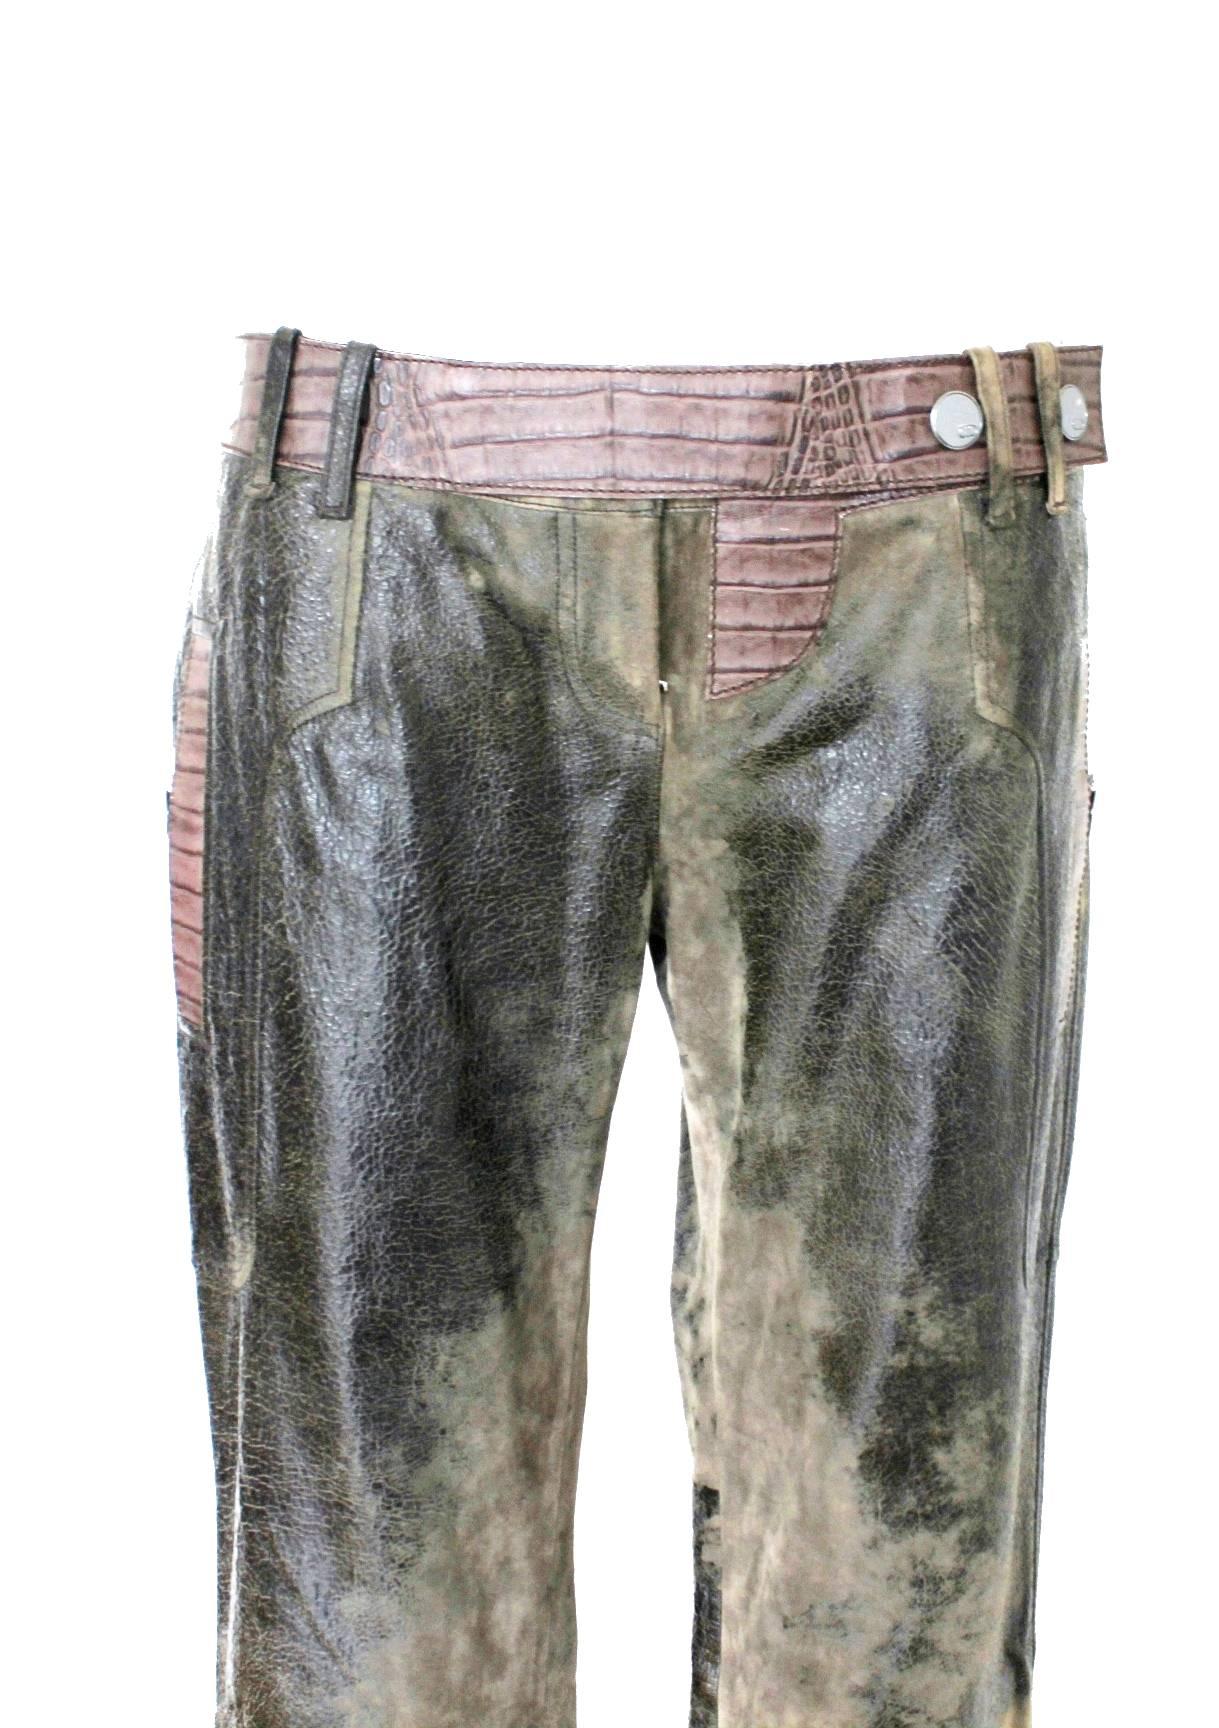 
CHRISTIAN DIOR 
SUEDE LEATHER PANTS
WITH CROCODILE EMBOSSED LEATHER DETAILS

A TRULY SPECIAL PIECE 

Condition: New with tags

DETAILS: 
A DIOR signature piece that will last you for years

Made out of finest suede skin in a camouflage